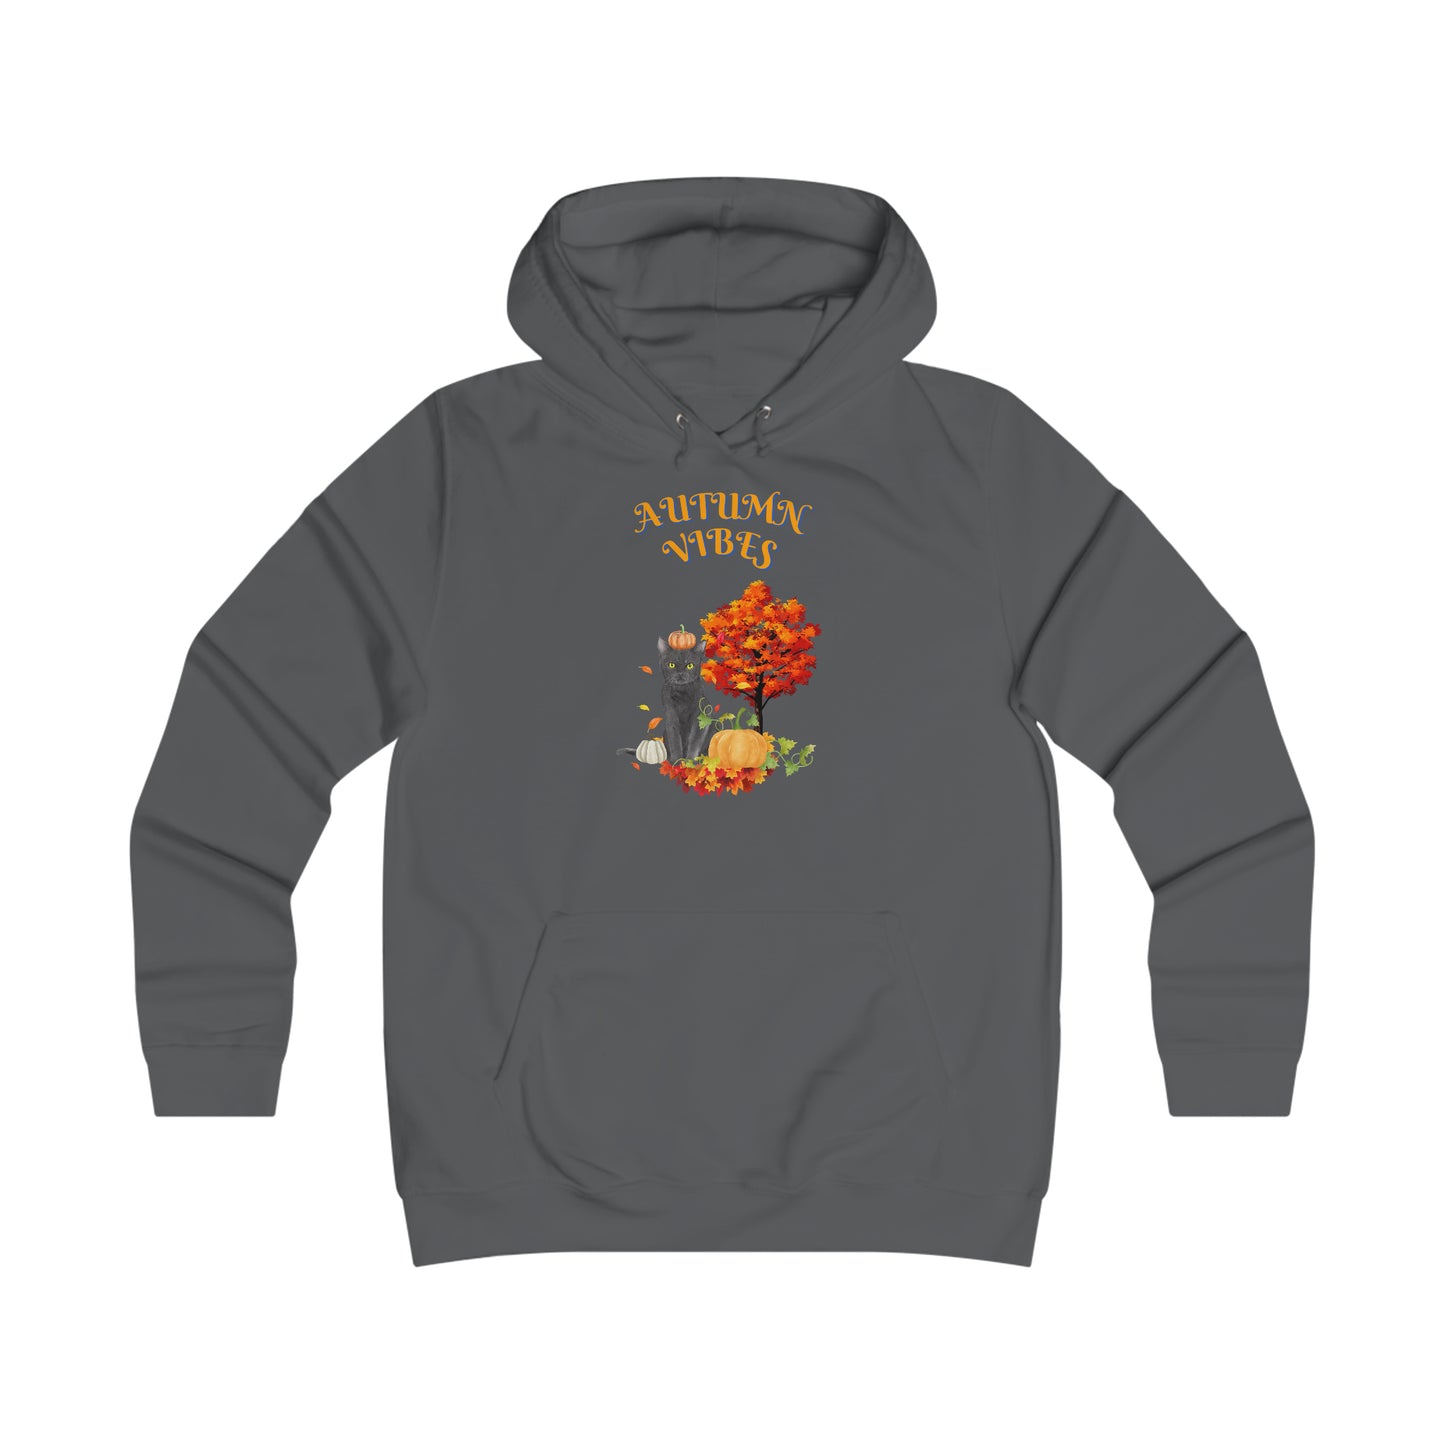 Autumn Vibes Girlie College Hoodie